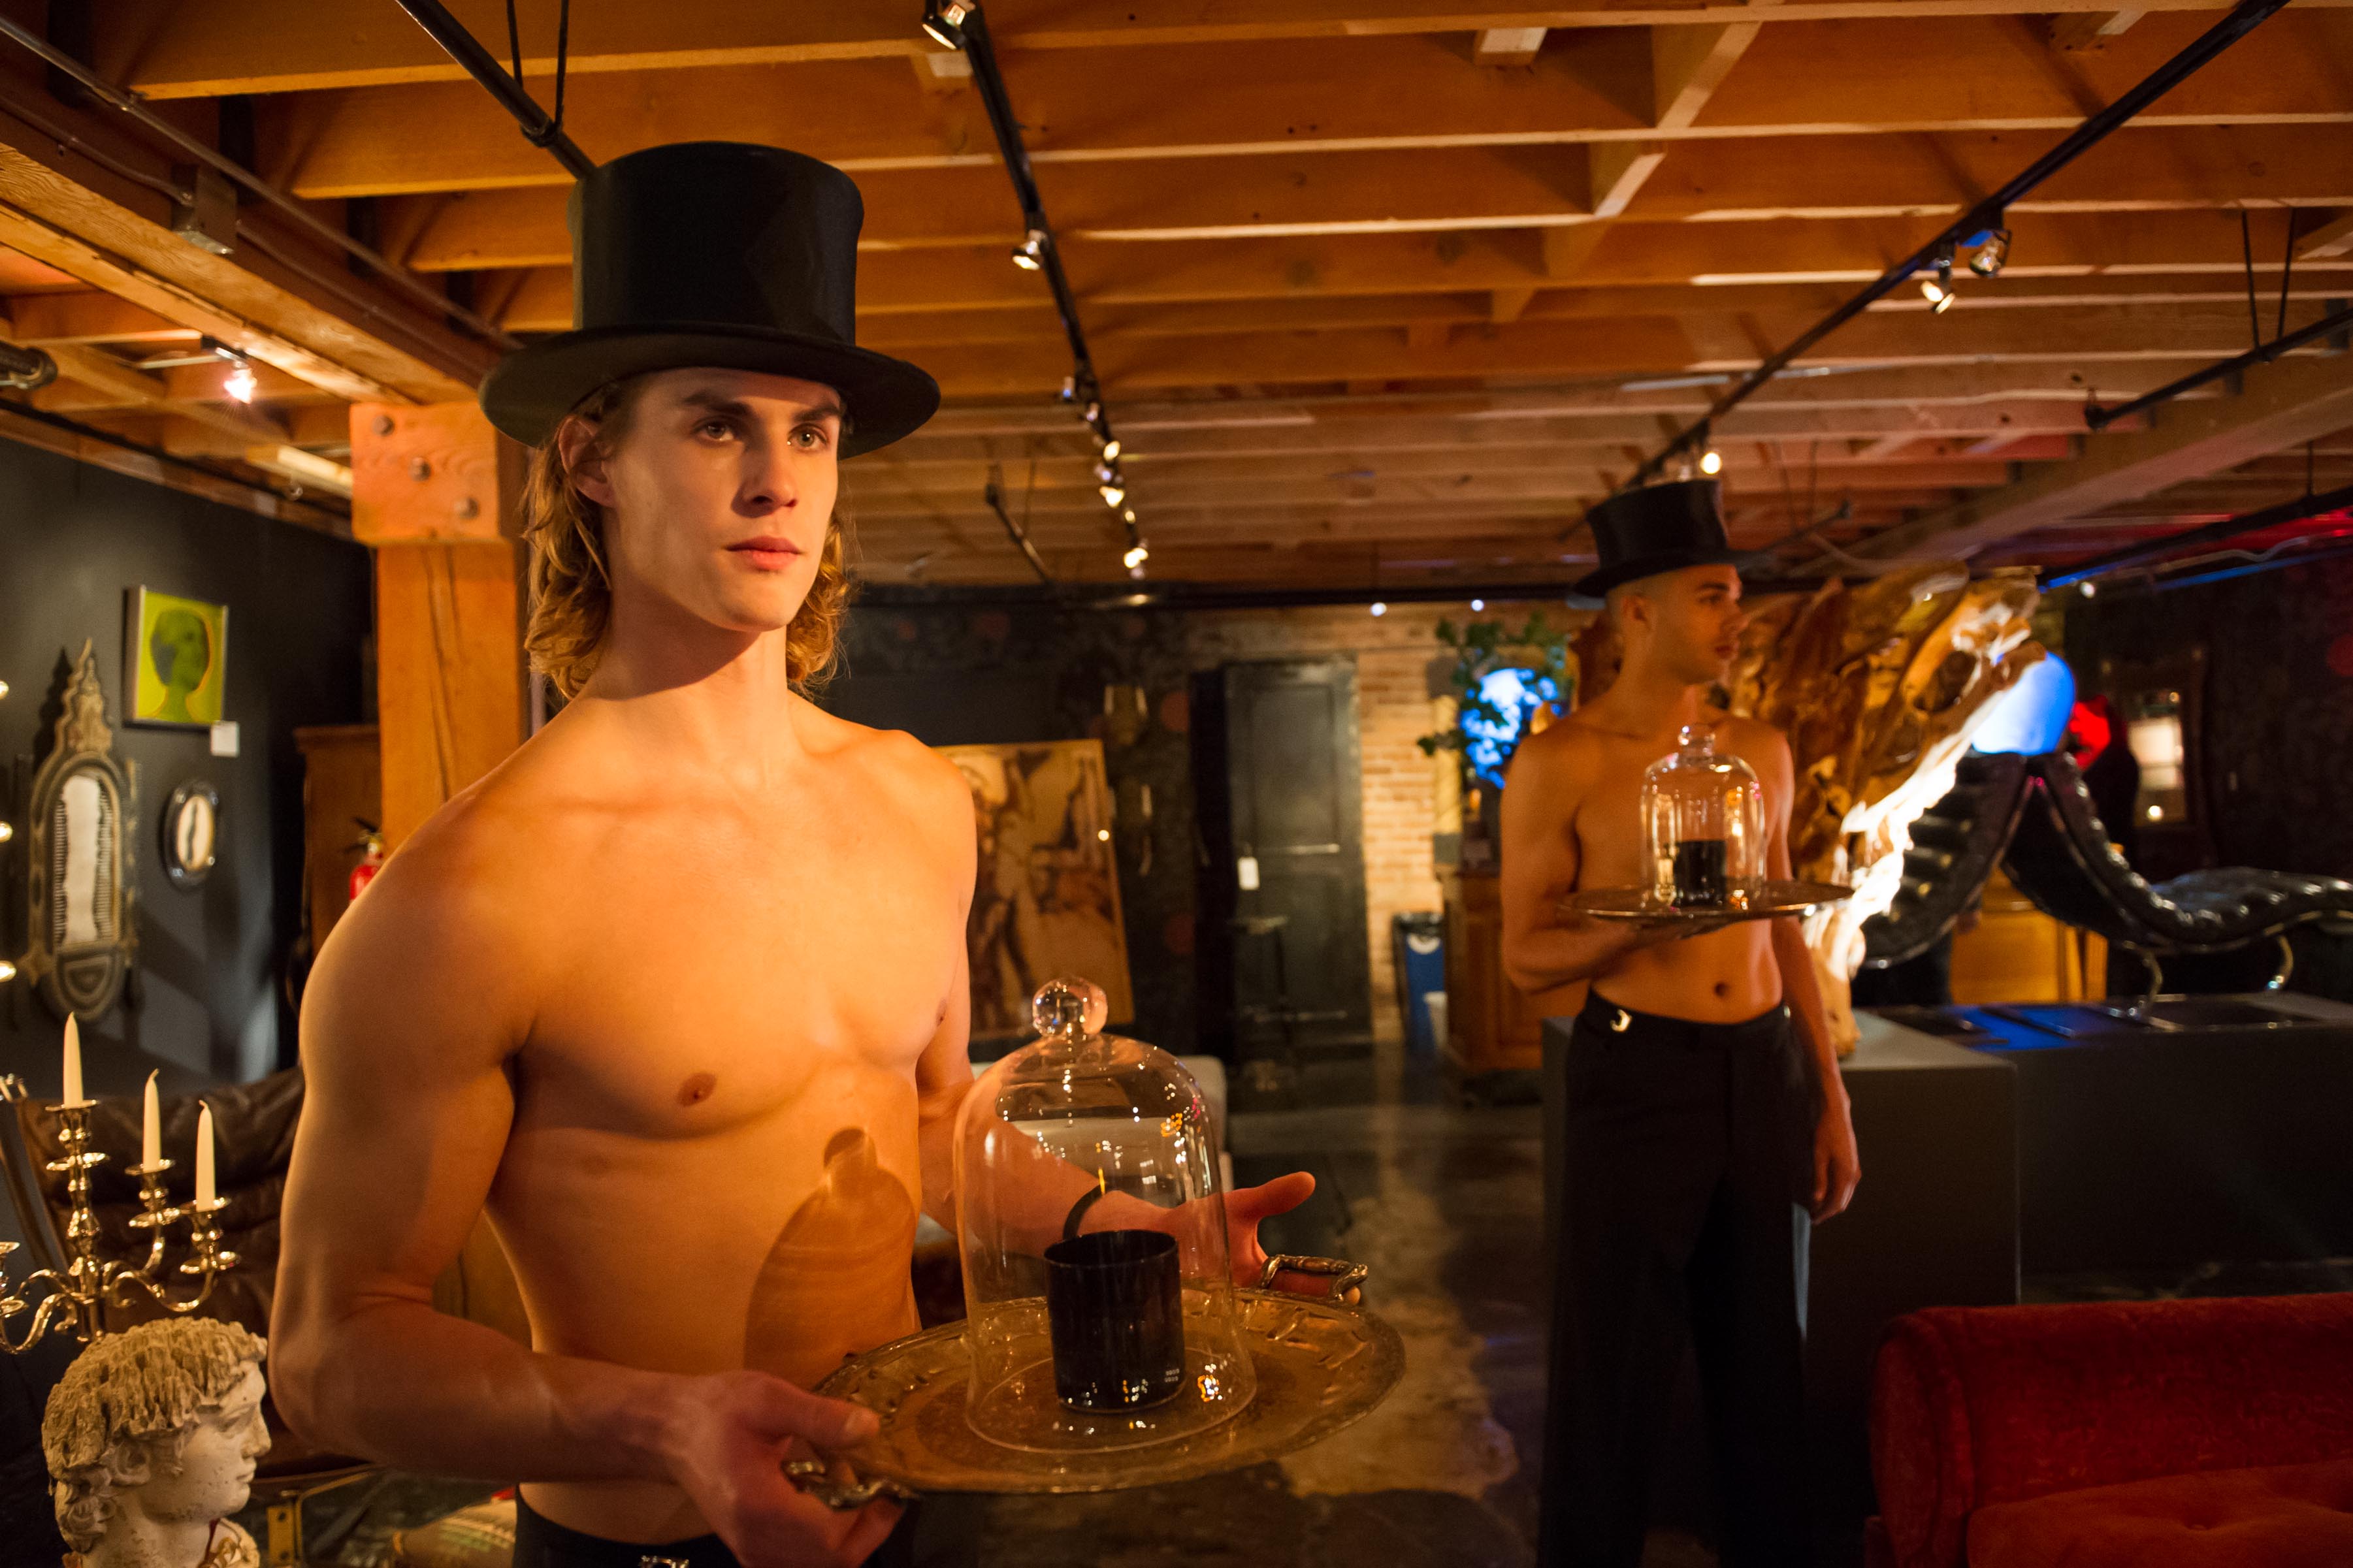 Two shirtless men wearing top hats hold trays with candles covered by glass domes in a dimly lit, eclectic room adorned with art and decorative items.